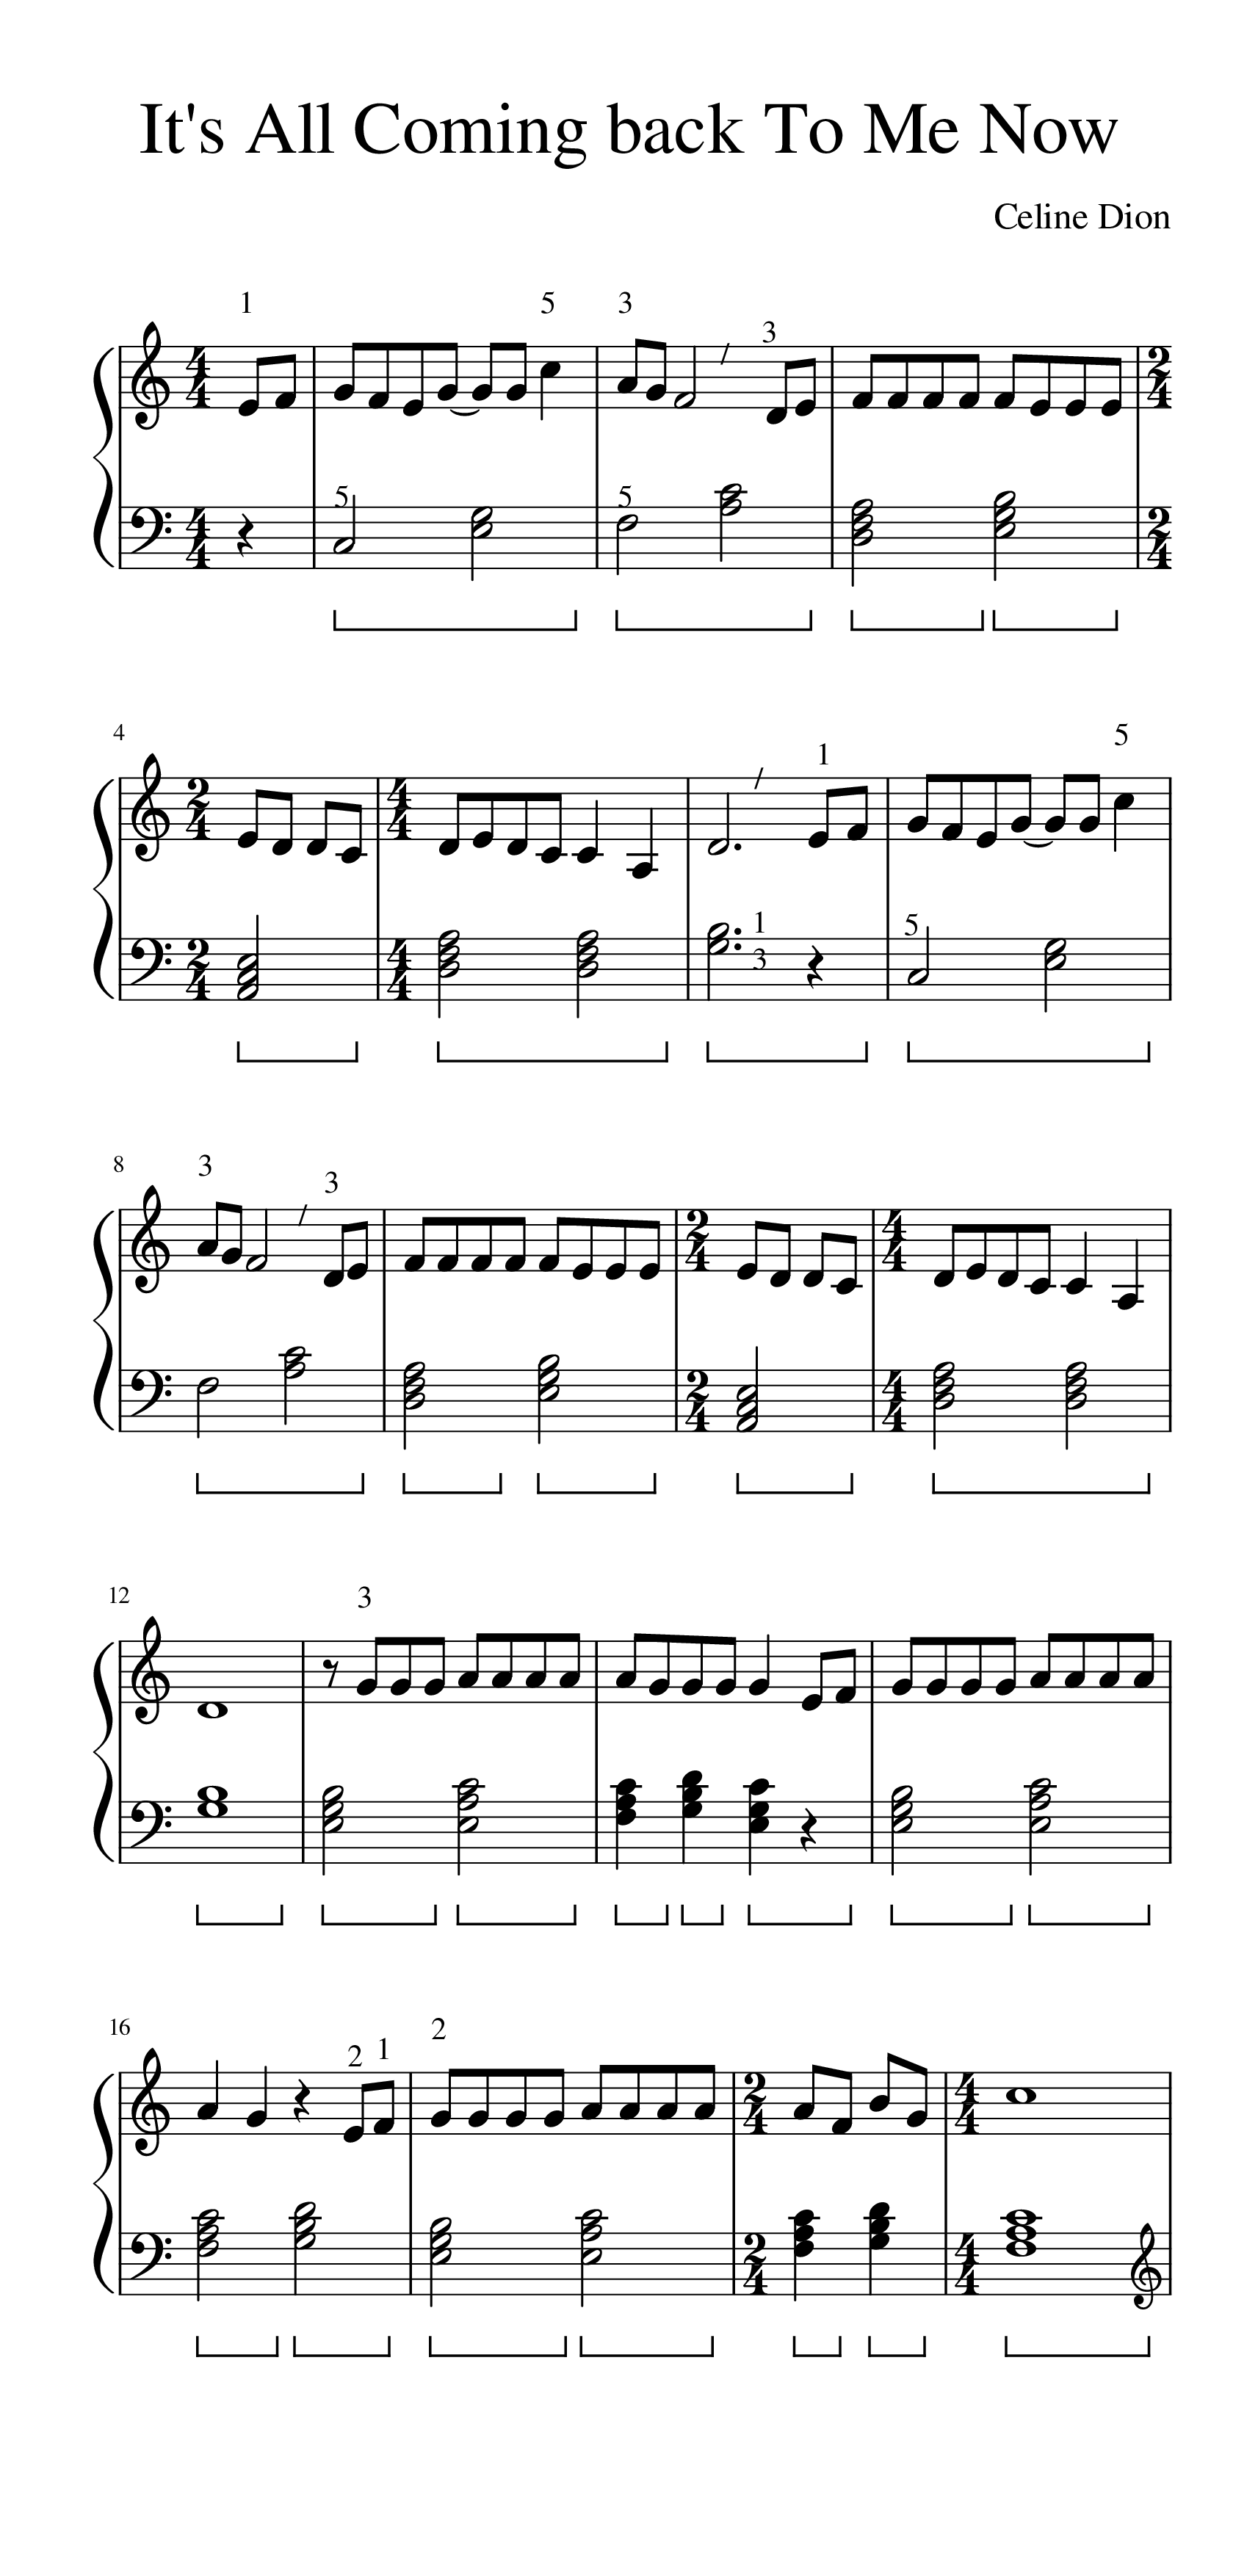 Celine Dion-It s All Coming Back To Me Now Sheet Music pdf